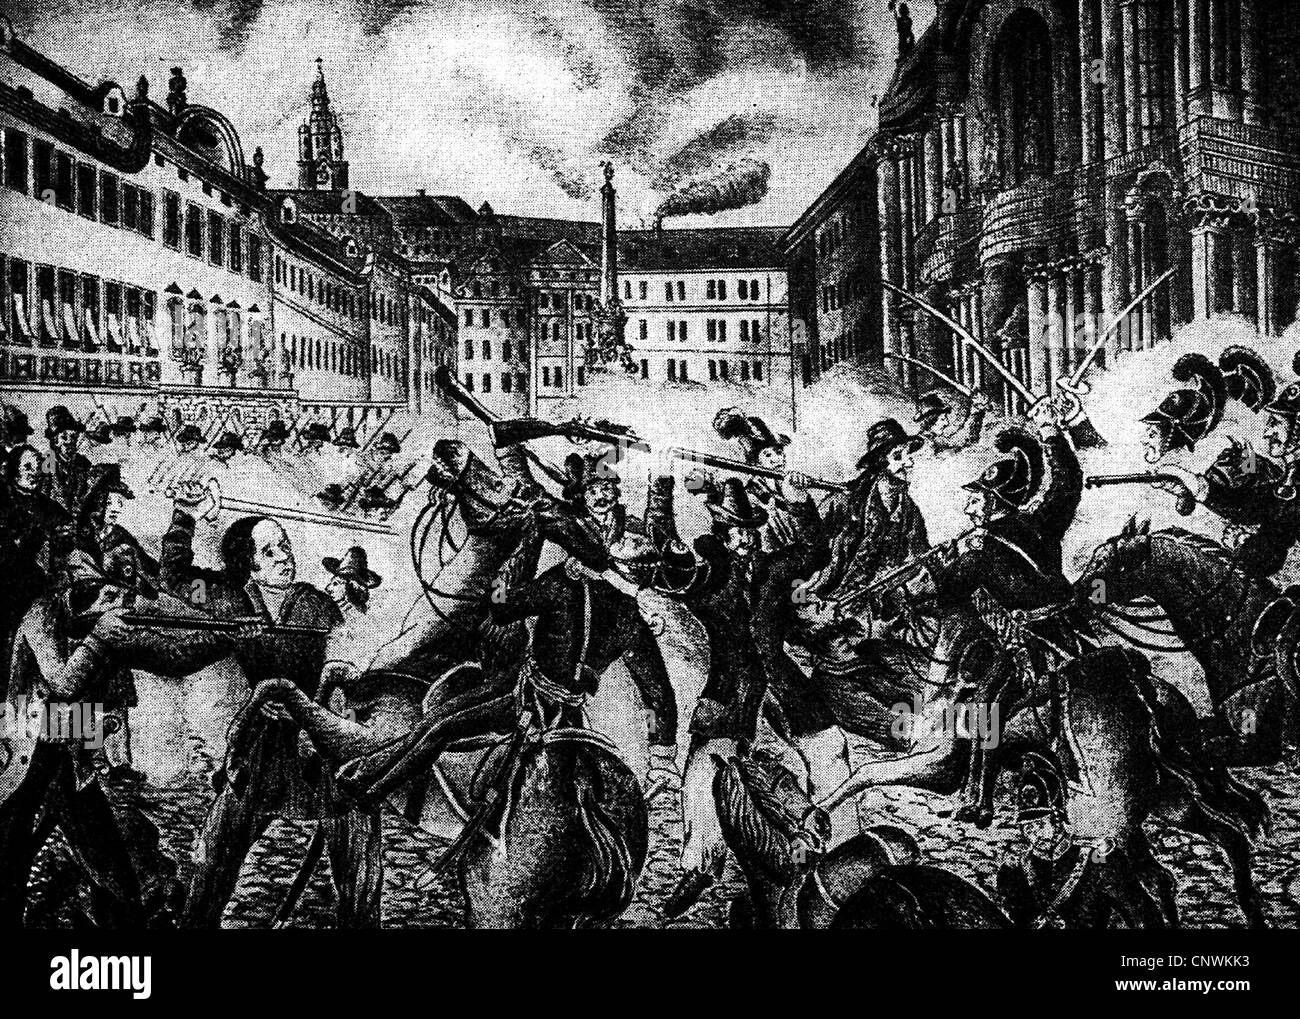 events, revolutions of 1848/1849, Prague, Mala Strana, street battle between revolutionists and Austrian soldiers, illustration, 19th century, Additional-Rights-Clearences-Not Available Stock Photo